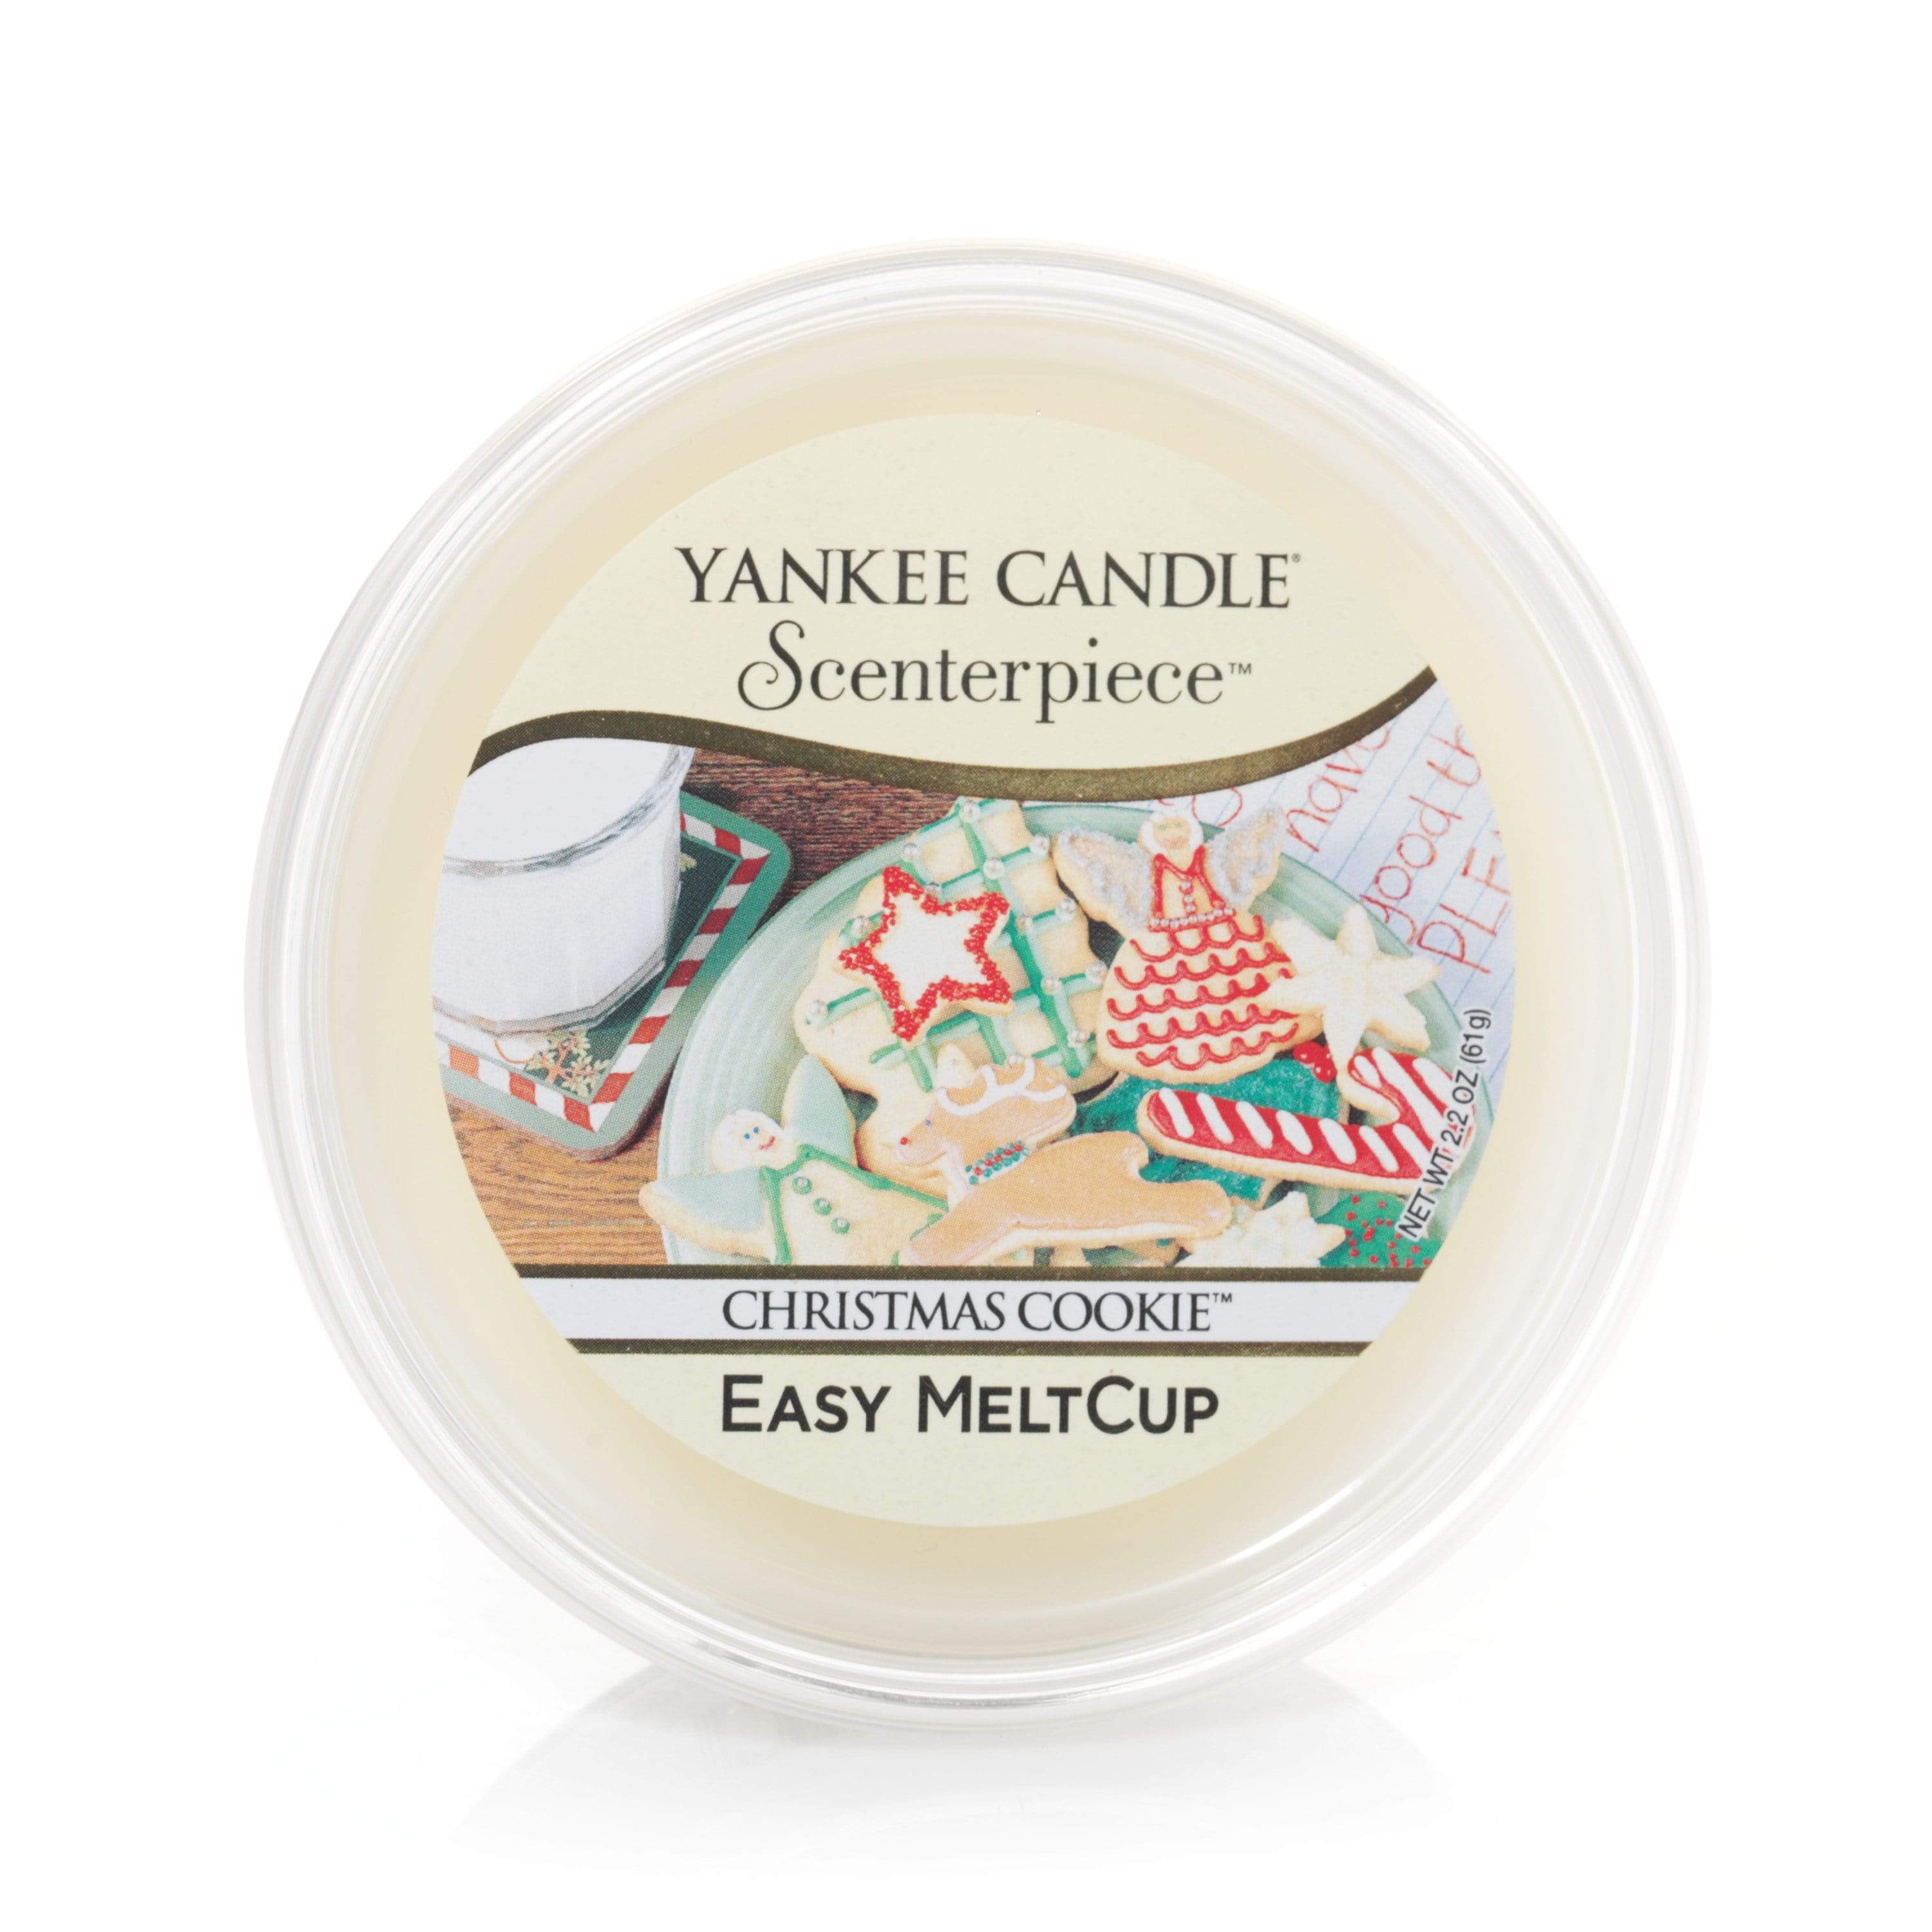 Yankee Candle Melt Cup Yankee Candle Scenterpiece Melt Cup - Christmas Cookie